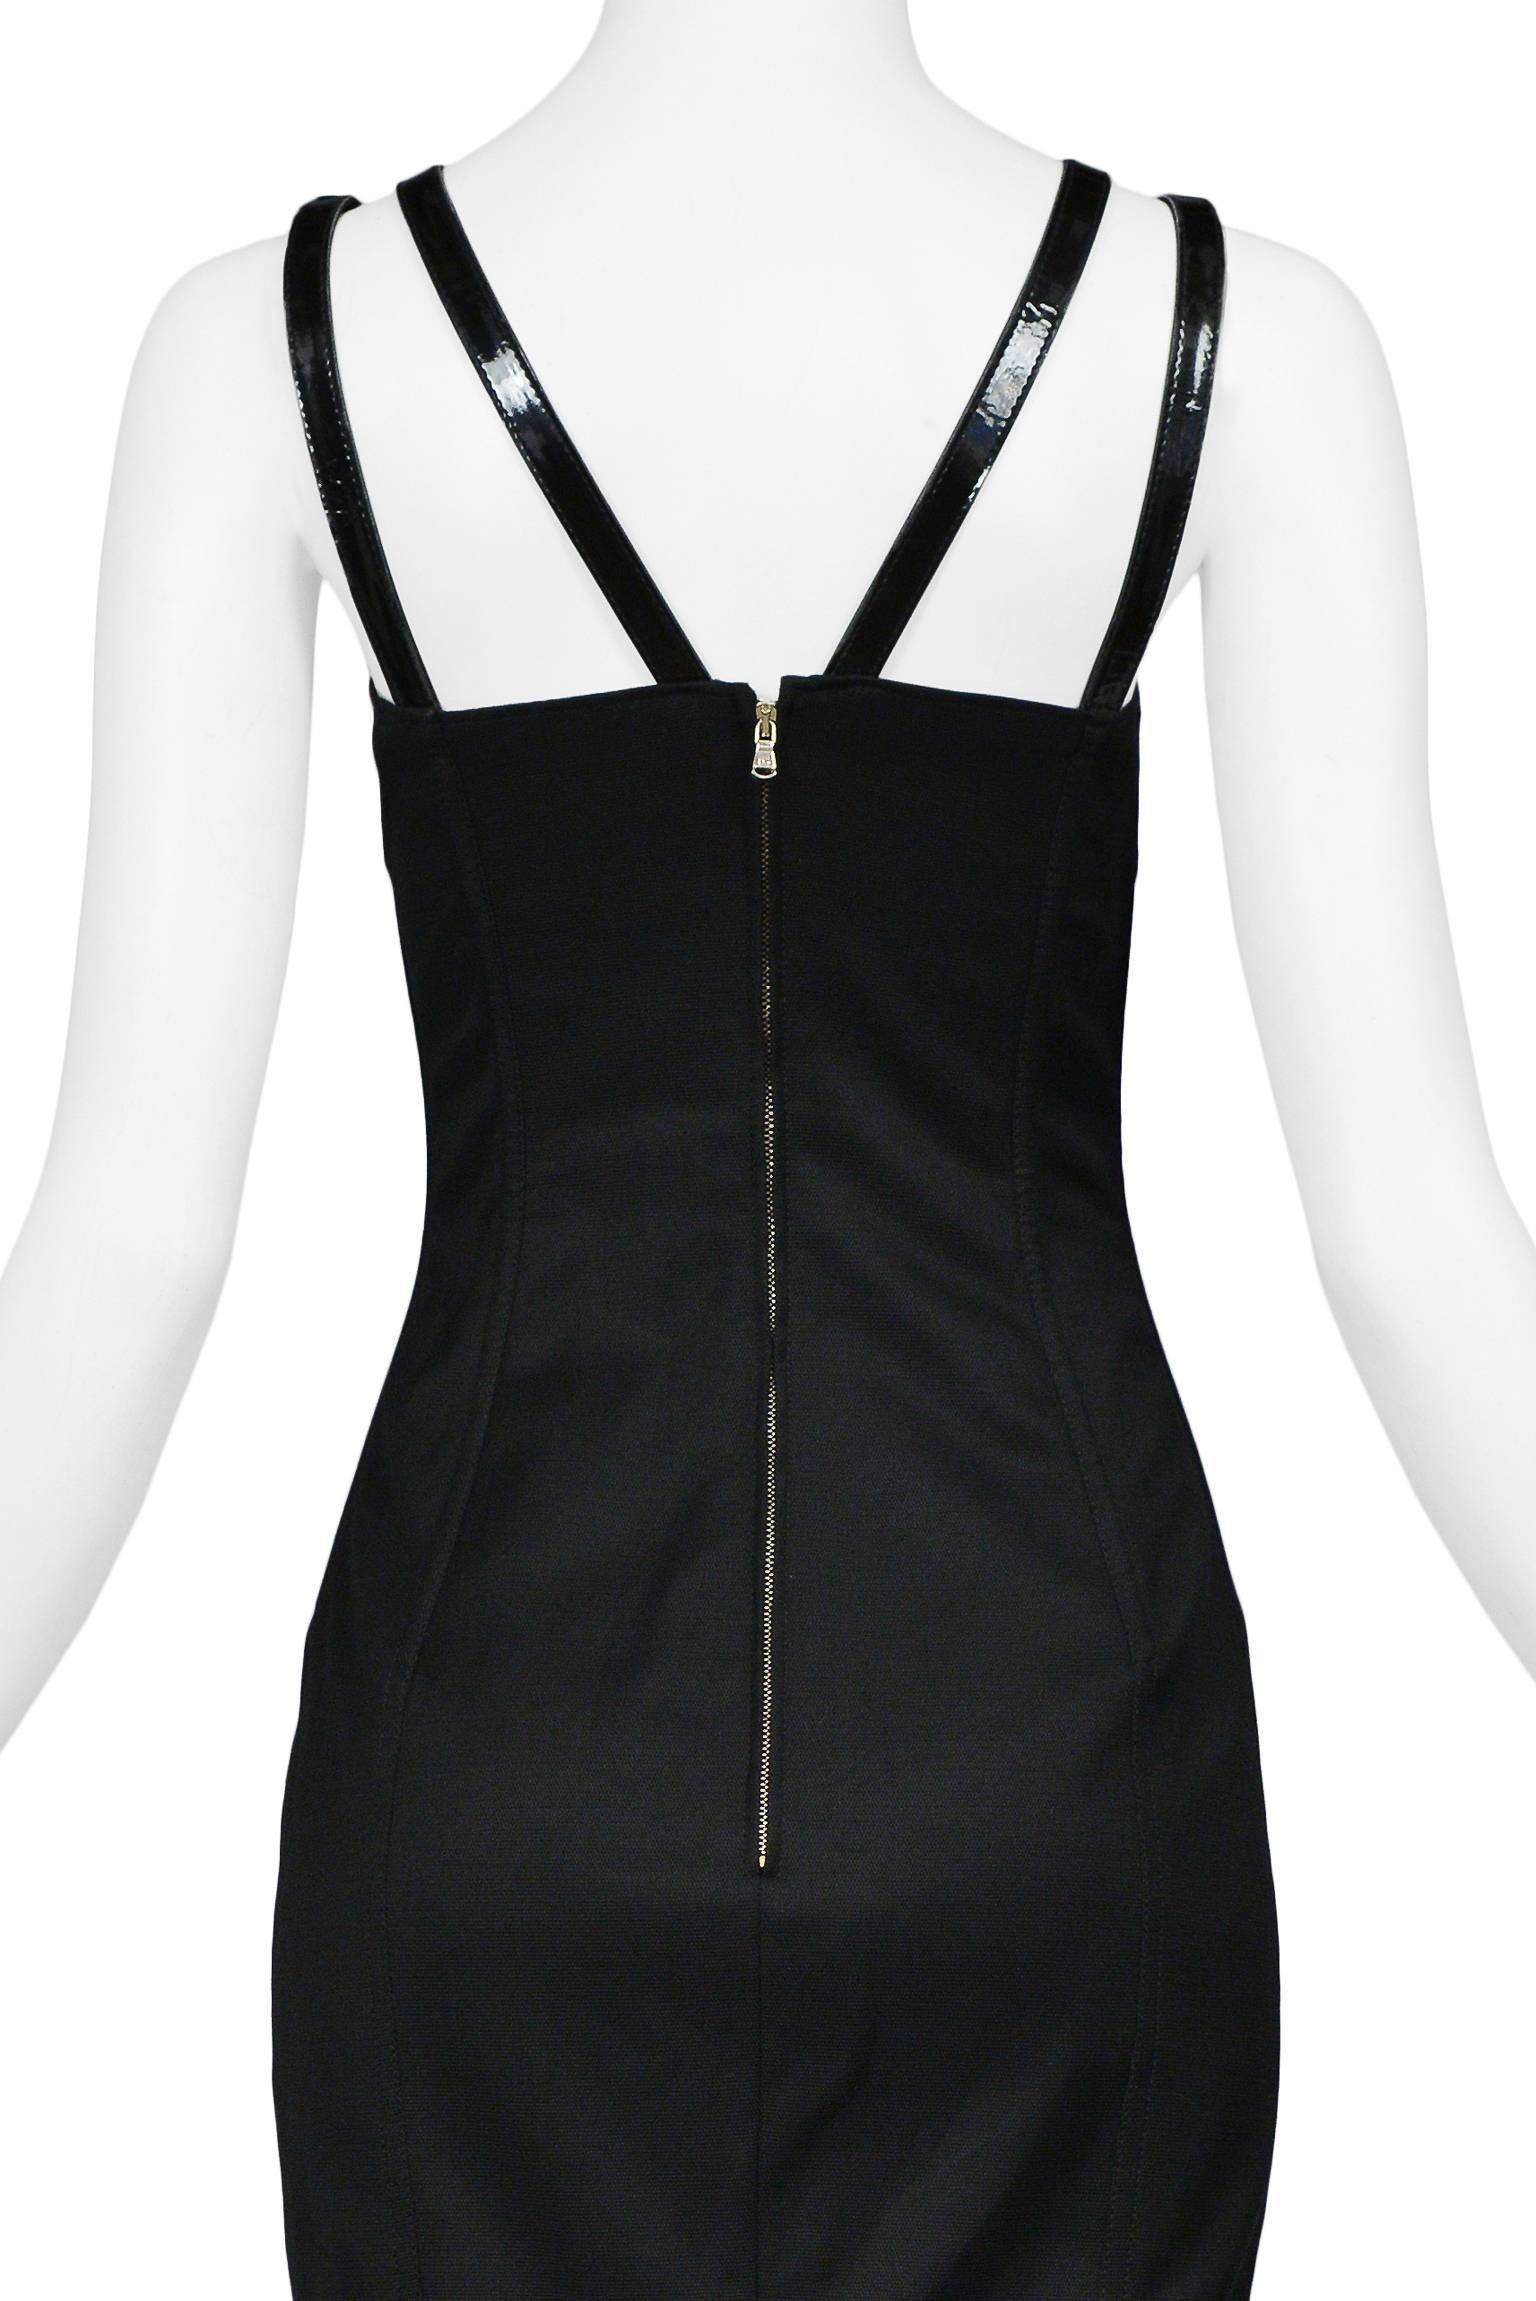 Dolce & Gabbana Black Bondage Bustier Dress w Double V Patent Straps 2007 In Excellent Condition In Los Angeles, CA